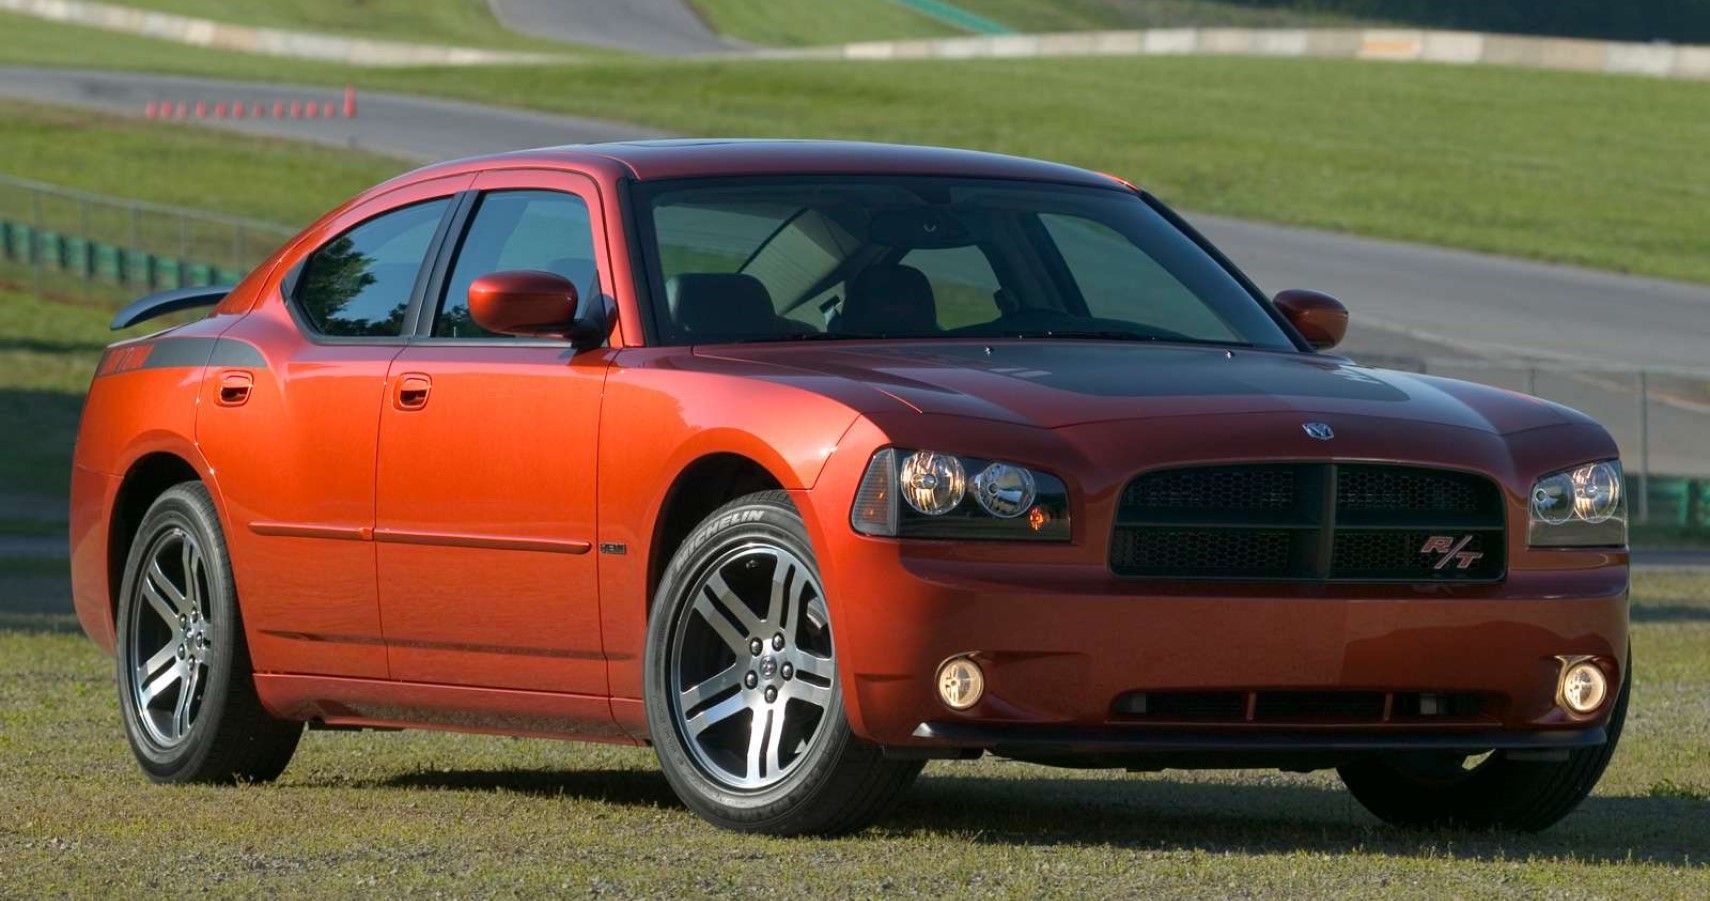 Here's How A 2006 Dodge Charger Maintenance Costs Could Hurt You